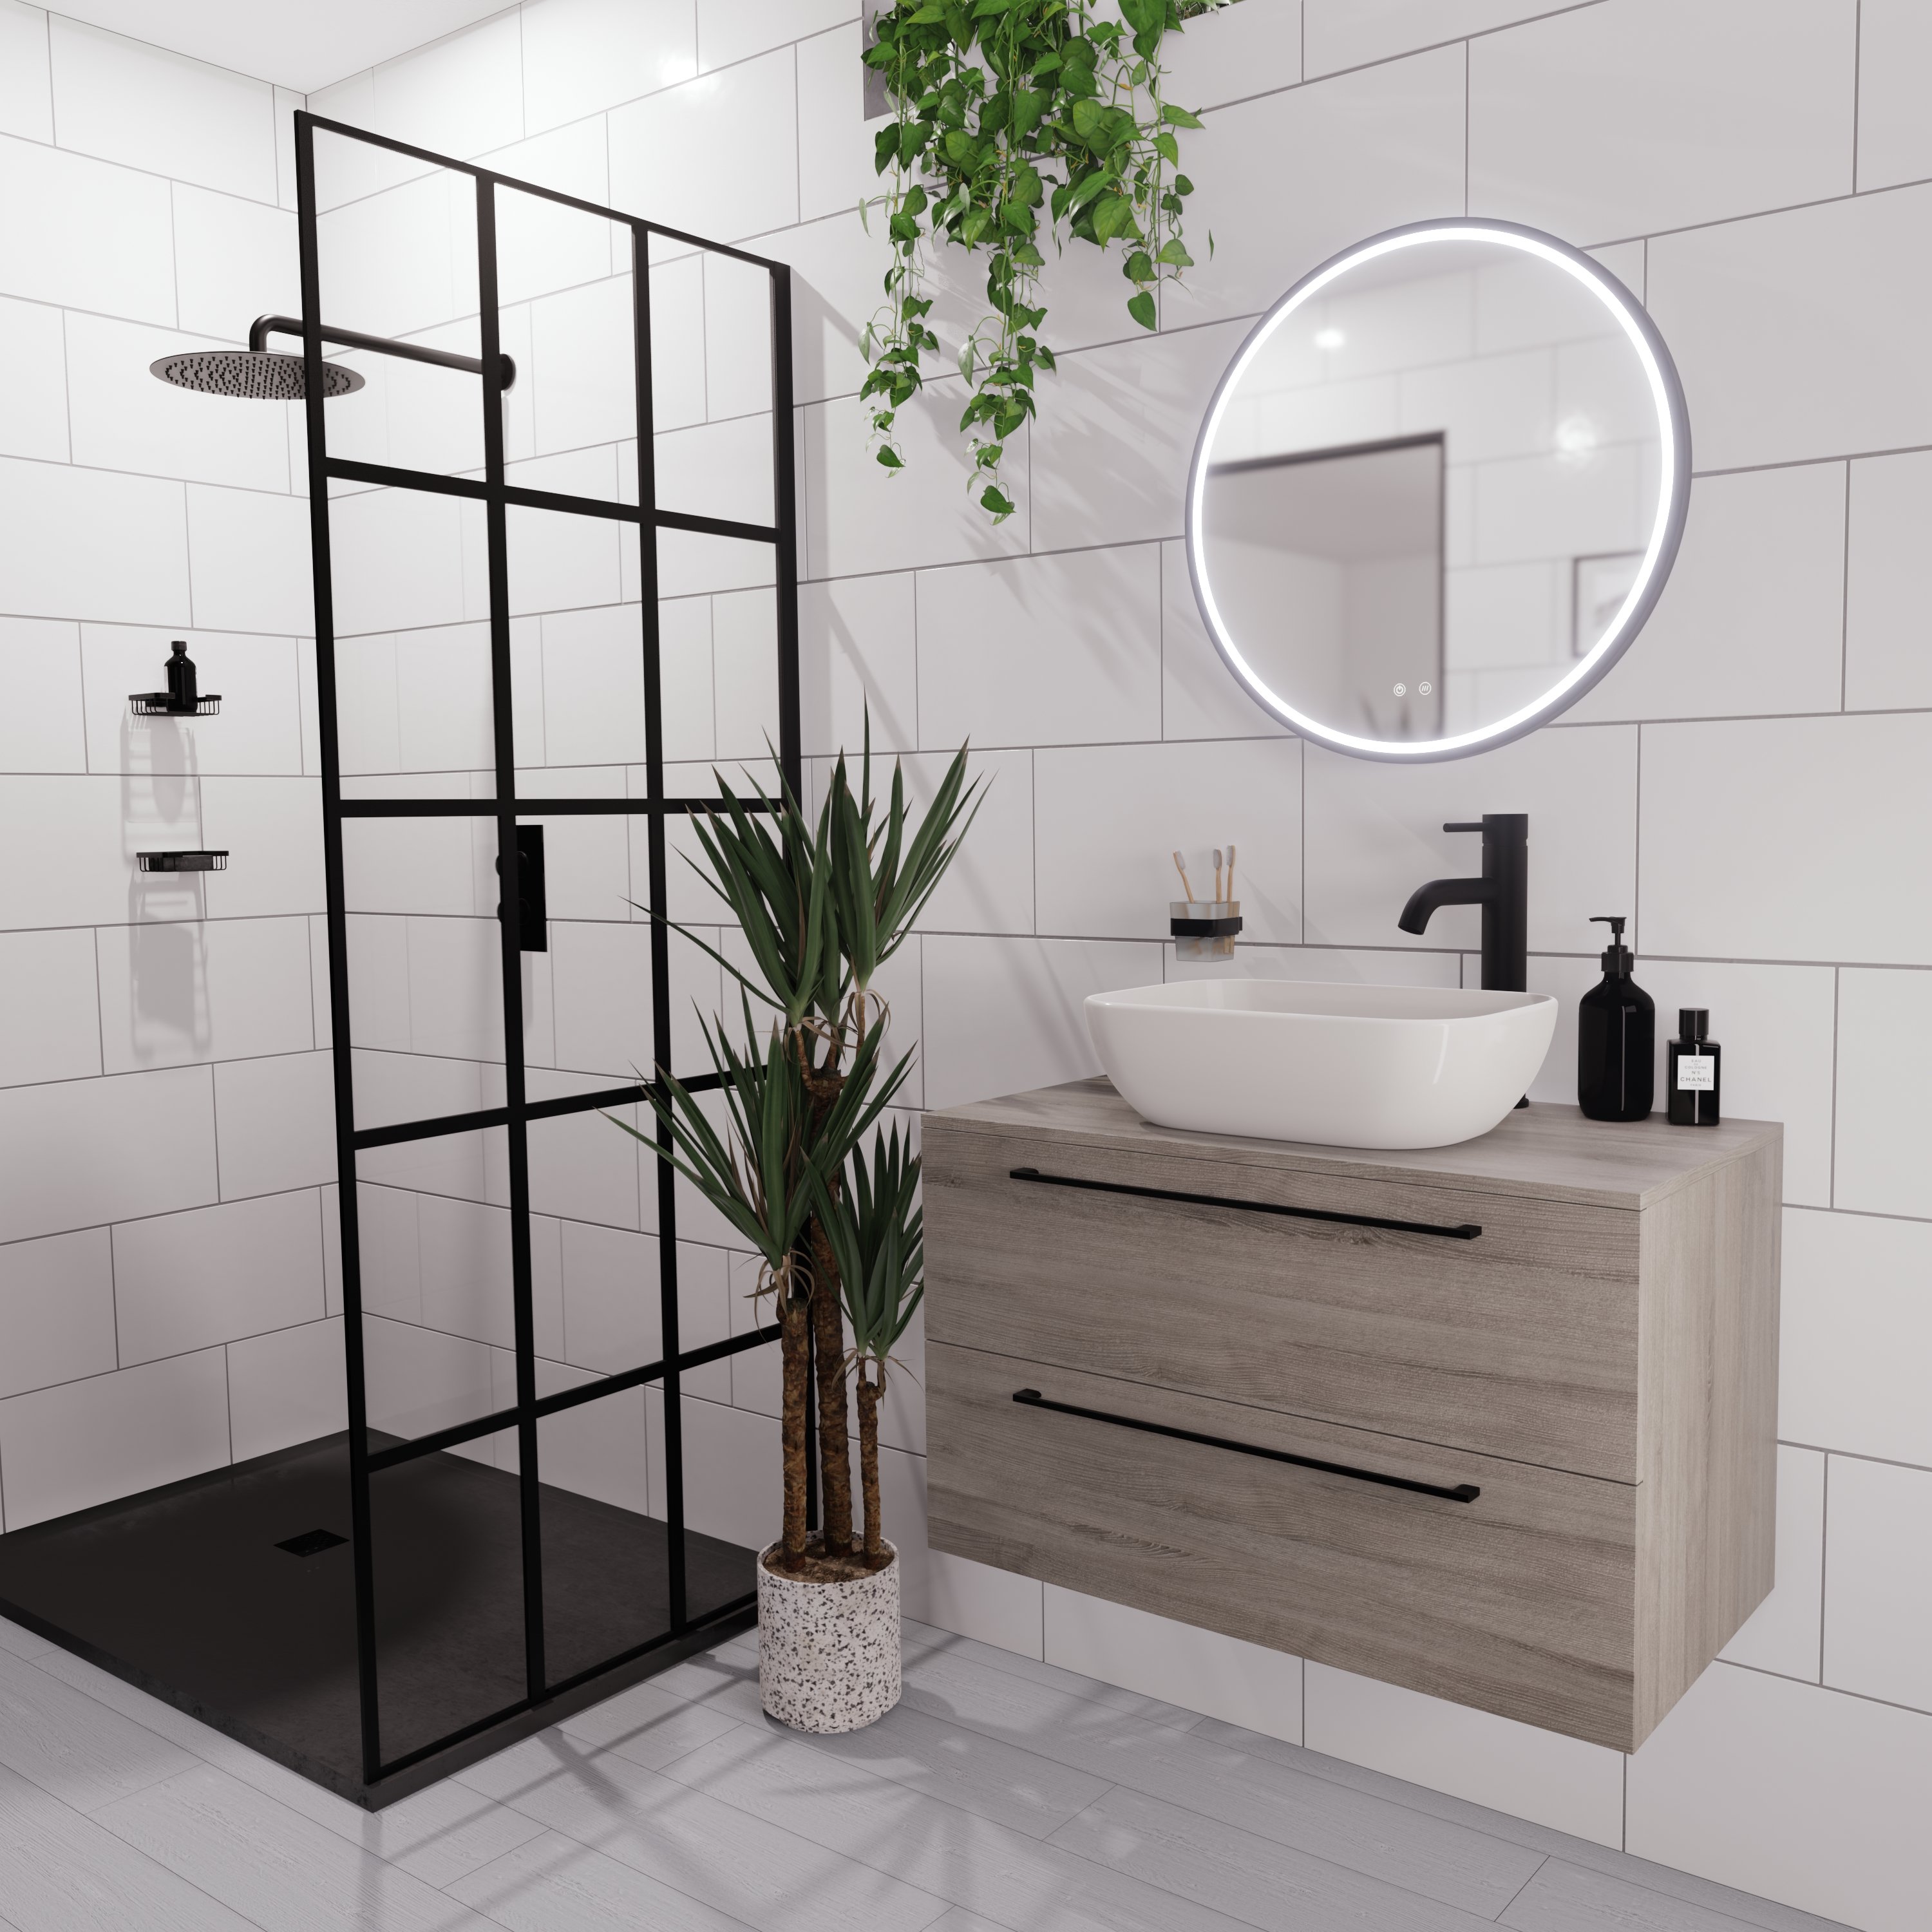 Modern shower enclosure bathroom suite with wall hung vanity unit and walk in shower enclosure.